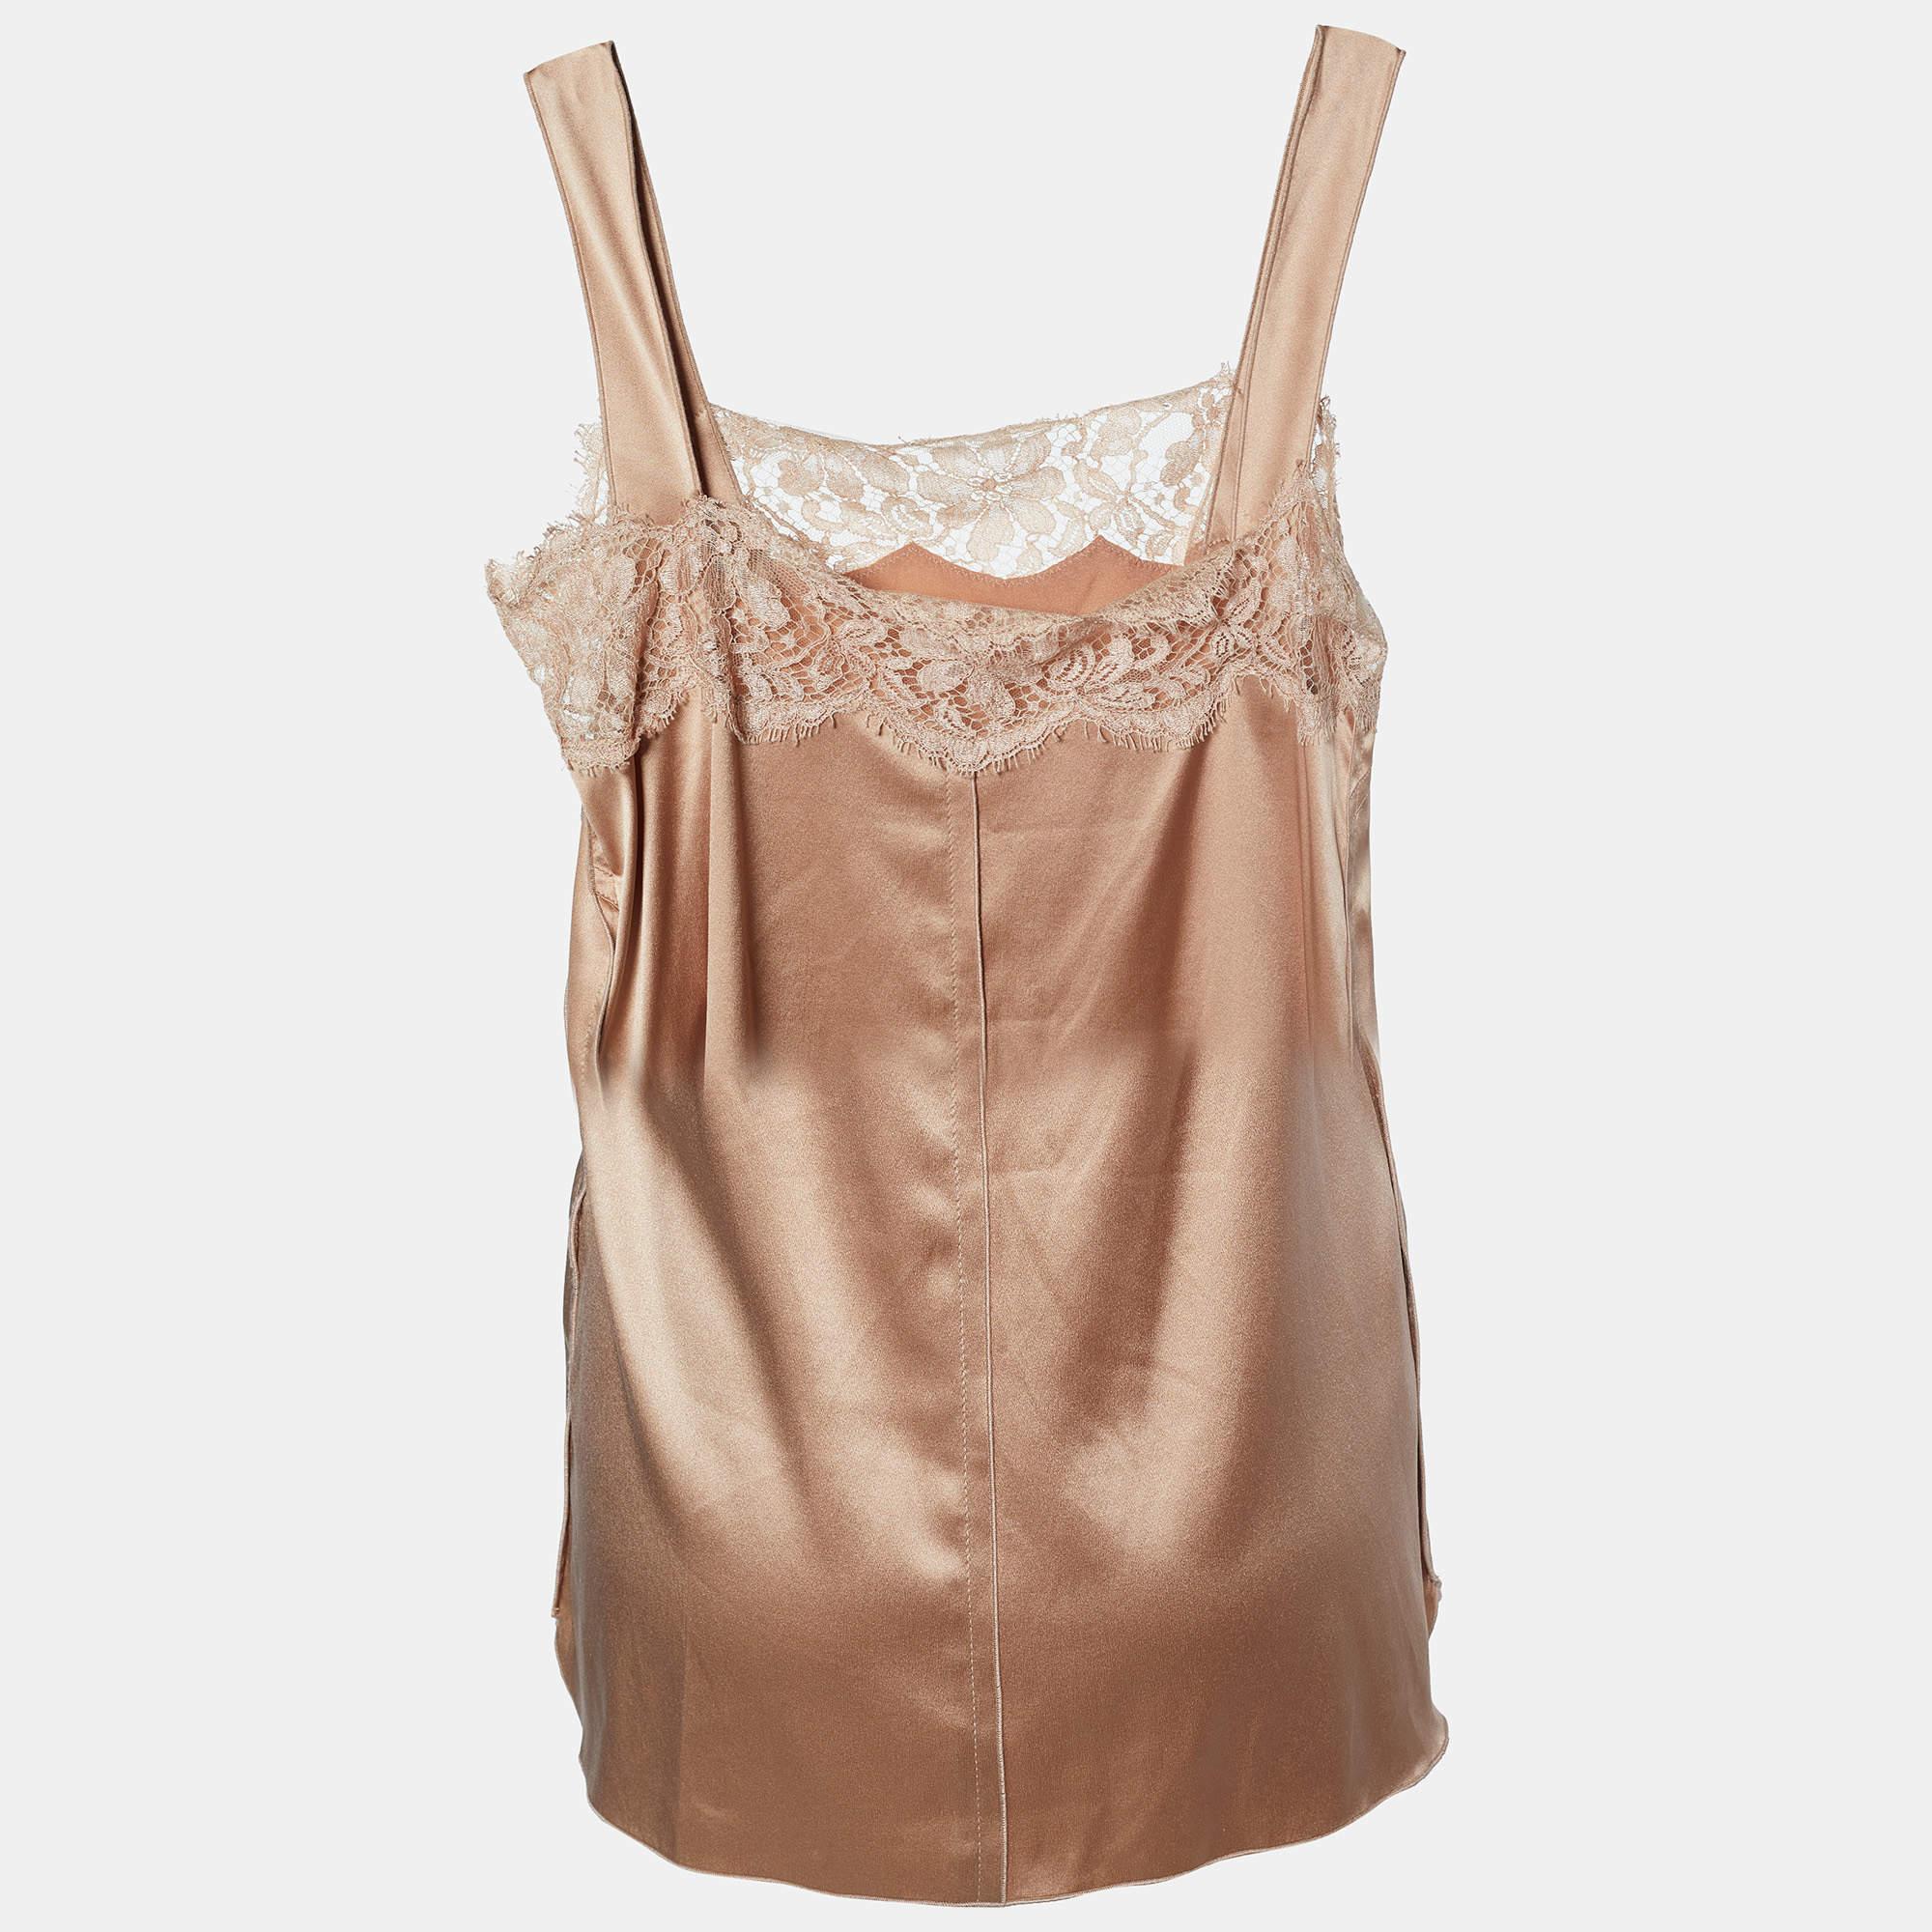 The Dolce & Gabbana top is a luxurious and elegant fashion piece. Made from high-quality satin, it features lace panels that exude sophistication. The cami style offers a relaxed fit.

